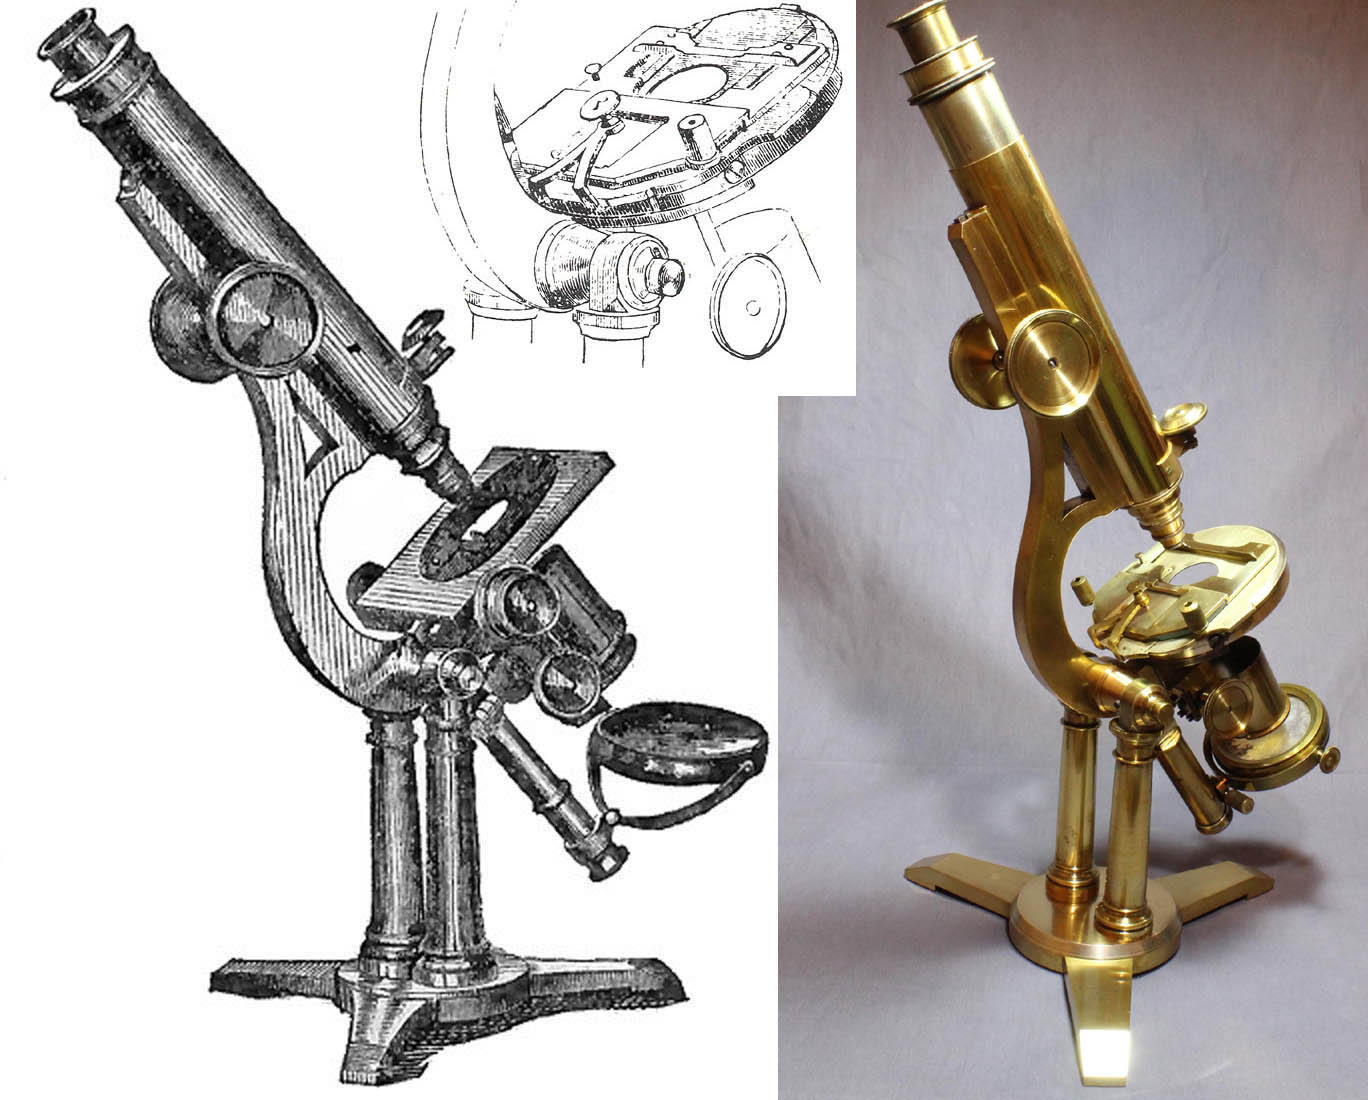 Engraving with Grand American Scope